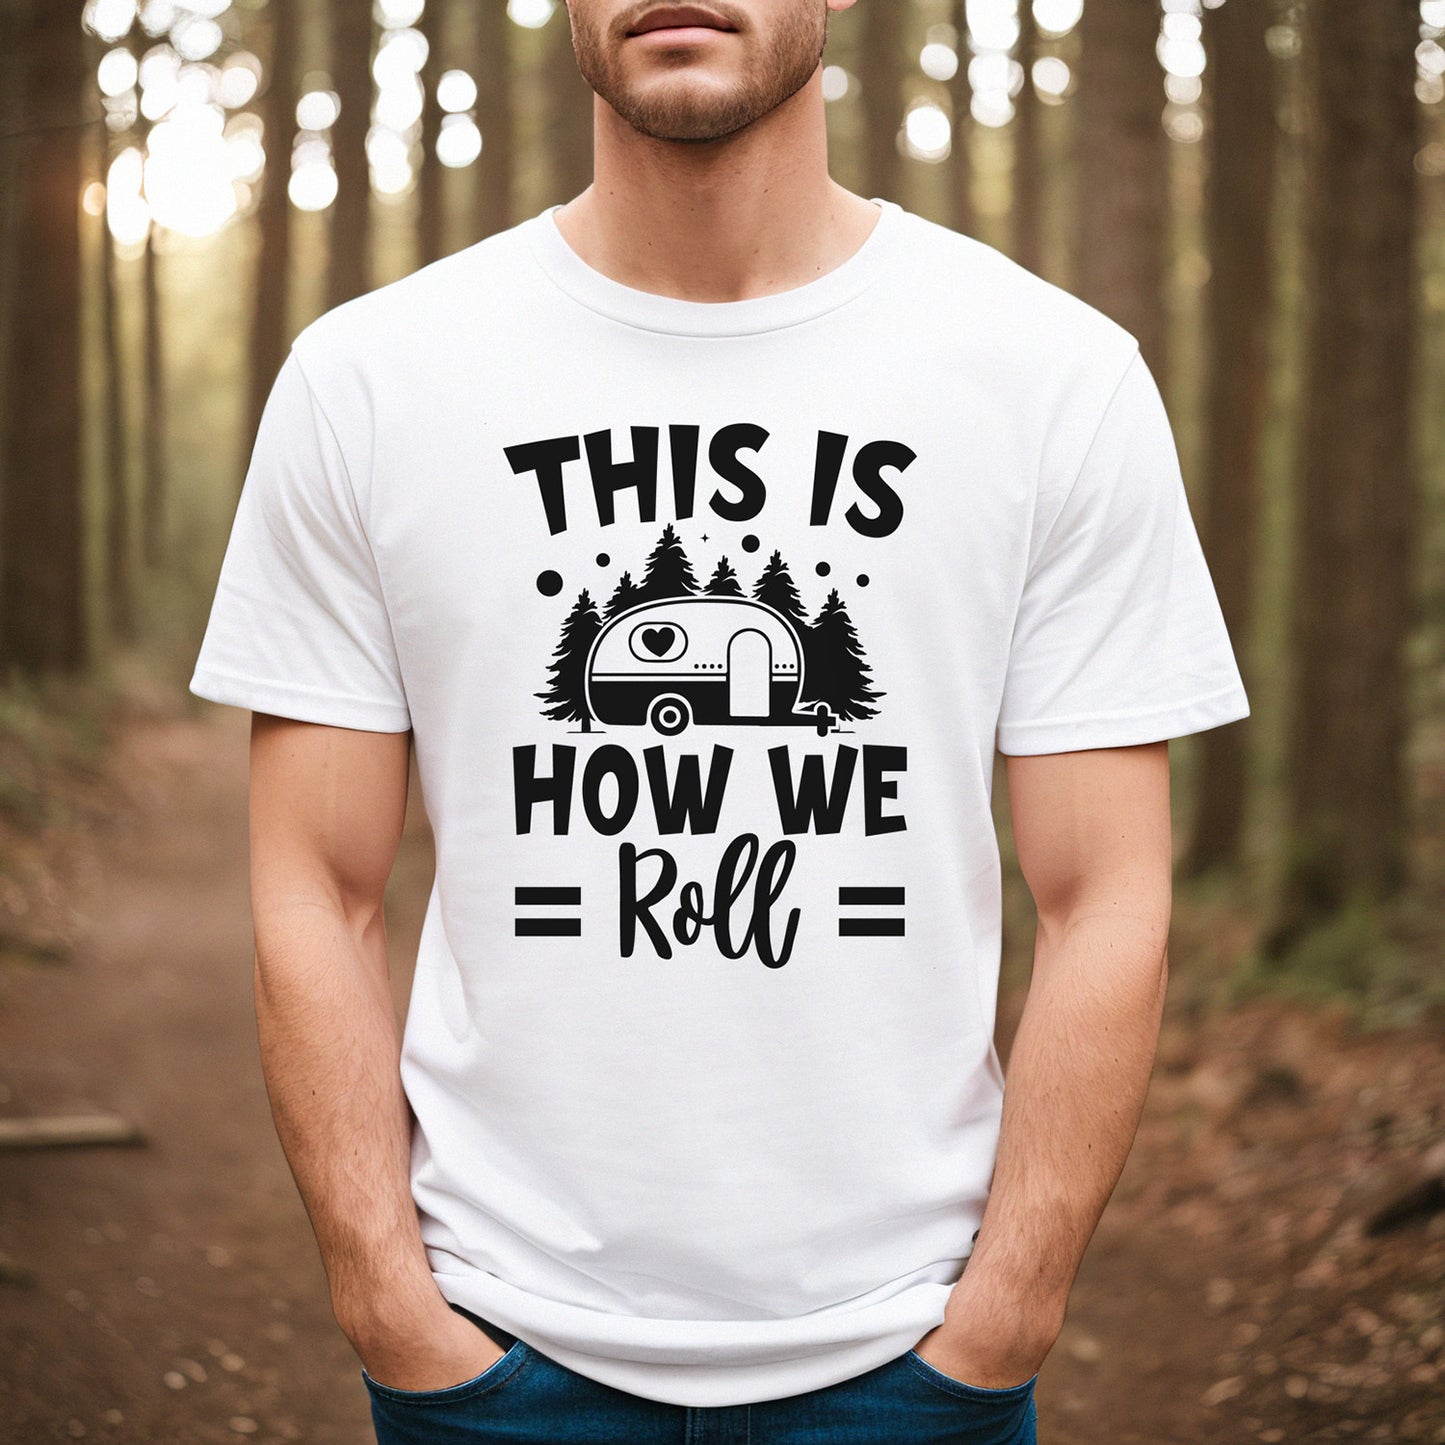 "This Is How We Roll" Graphic